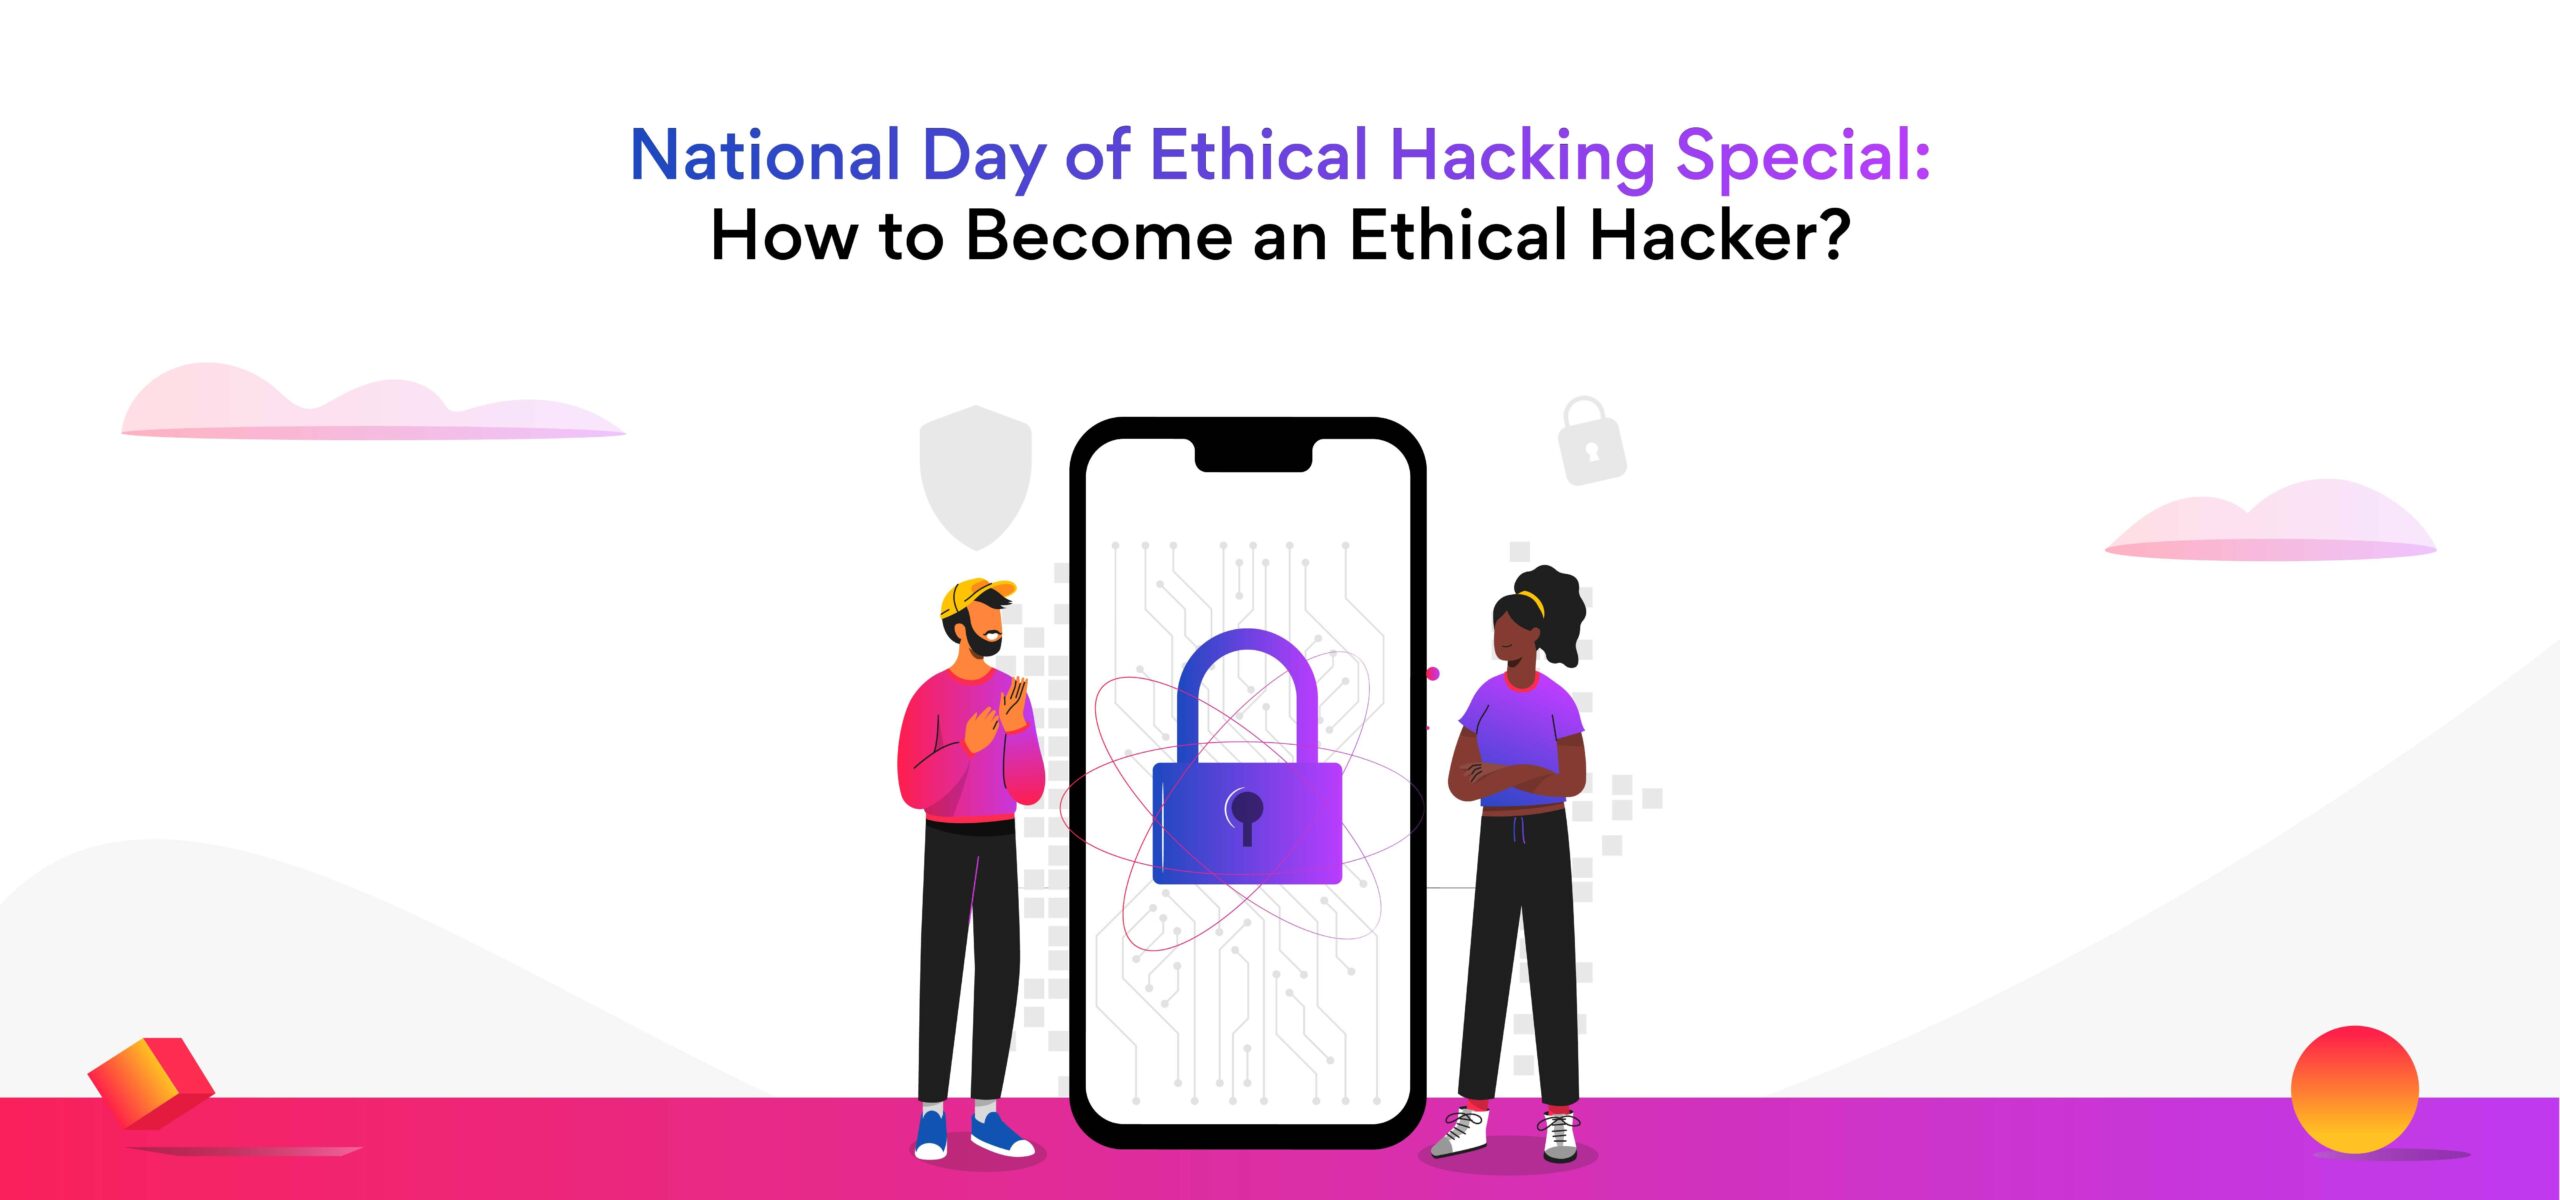 8 Steps to Become an Ethical Hacker